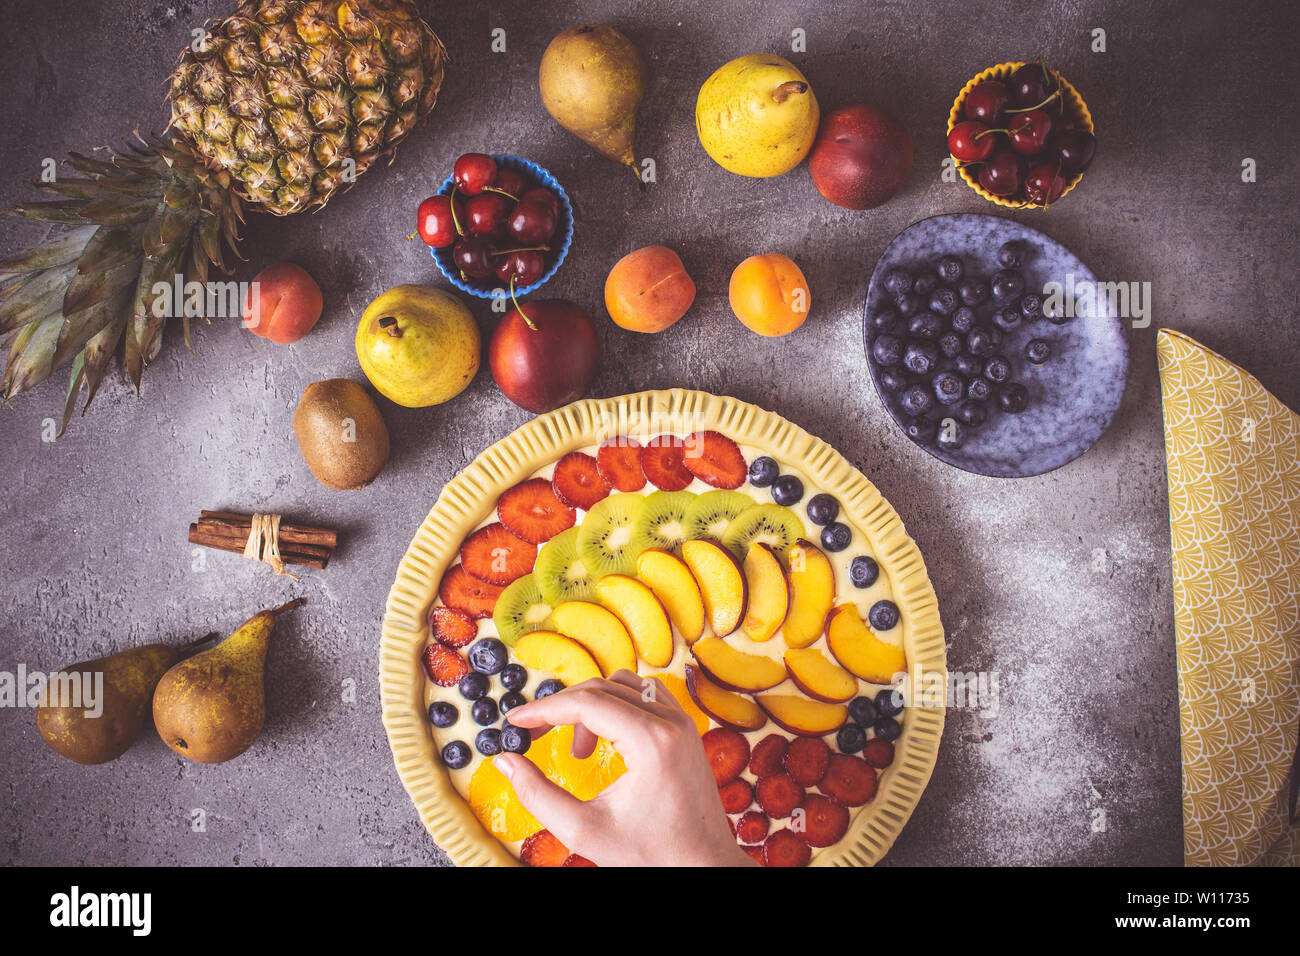 Female Hands Prepare Fruit Pie with Colorful Fruits and Fresh Dough. Healthy Food Concept. Stock Photo